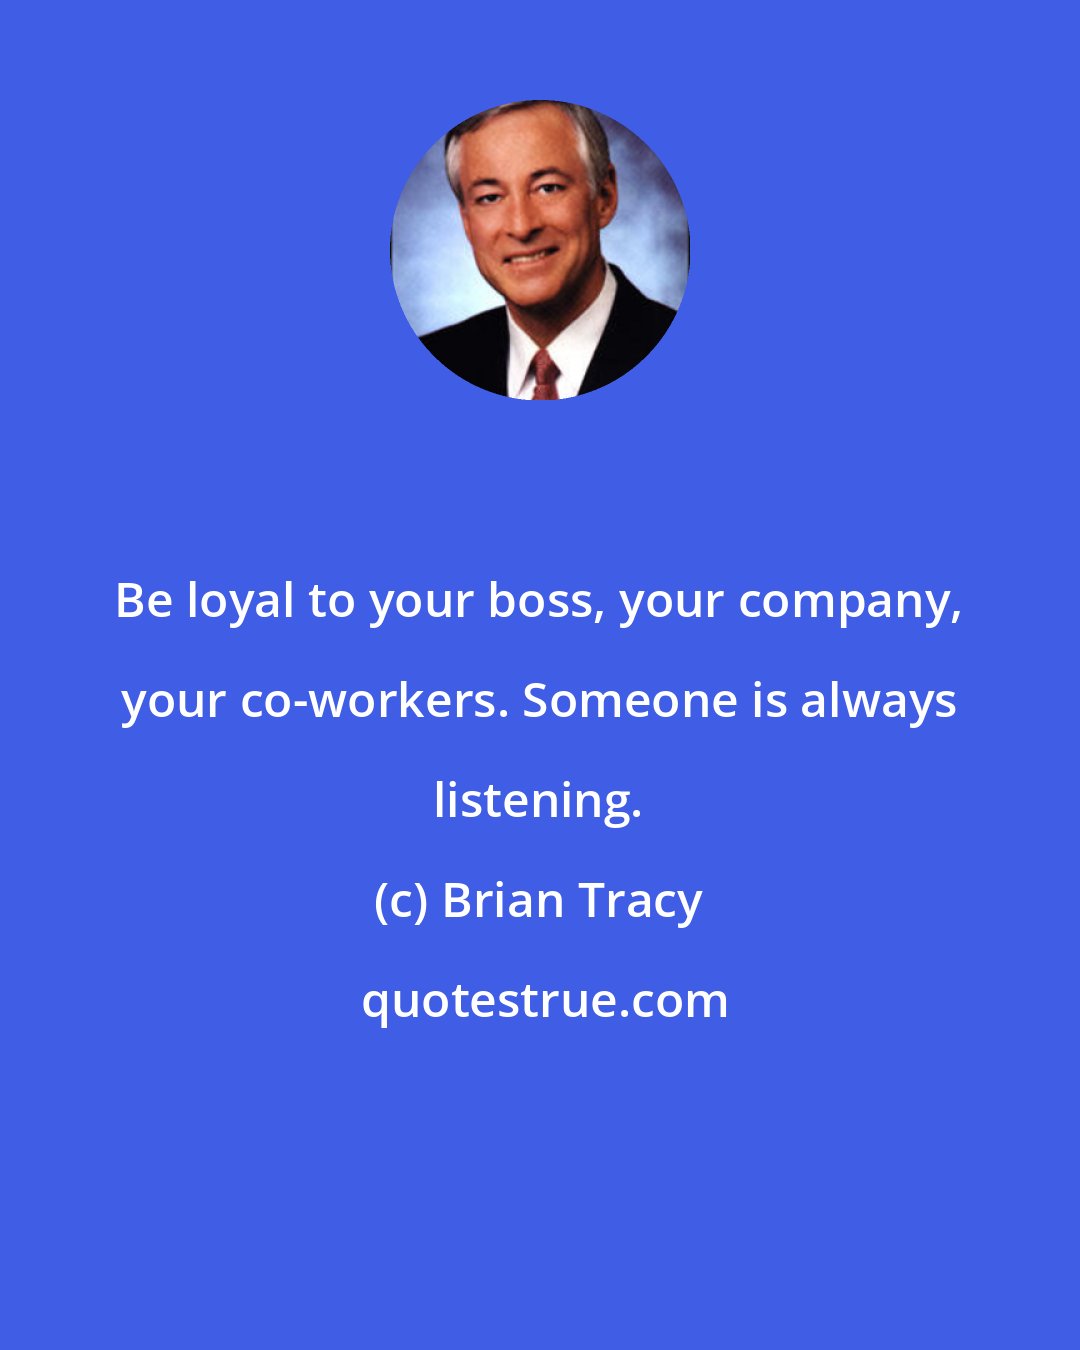 Brian Tracy: Be loyal to your boss, your company, your co-workers. Someone is always listening.